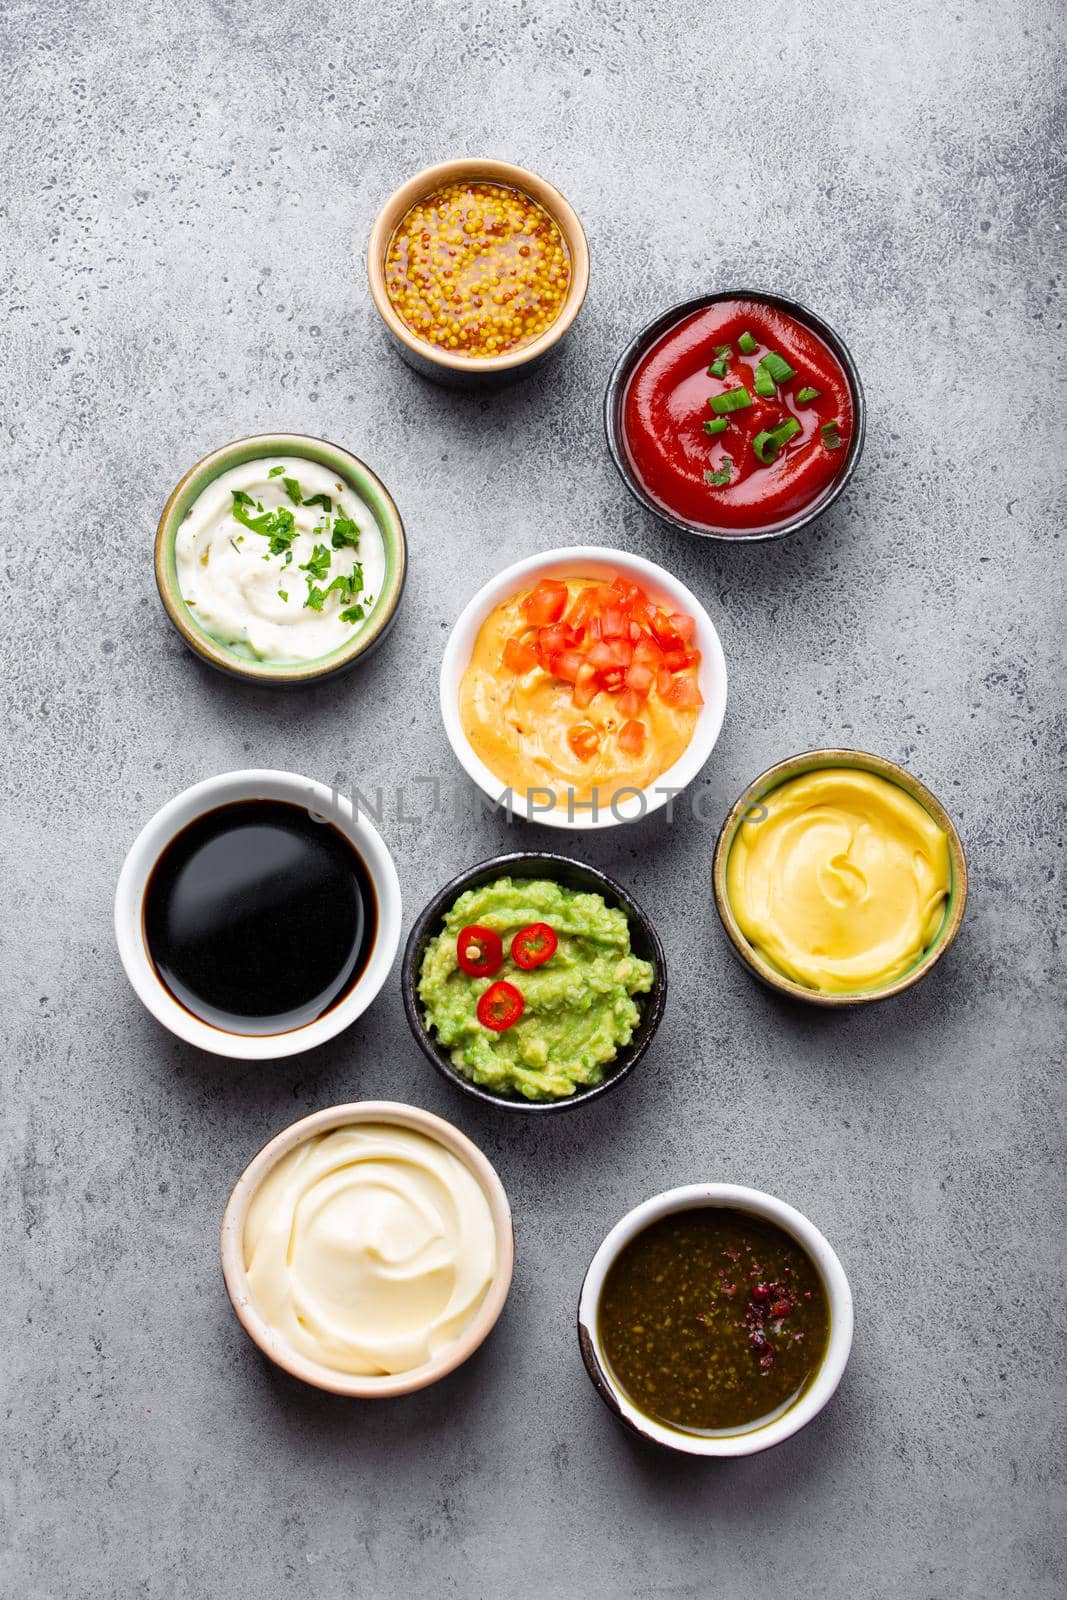 Set of different sauces in bowls on gray rustic concrete background, top view, close-up. Tomato ketchup, mayonnaise, guacamole, mustard, soy sauce, pesto, cheese sauce - assortment of dips